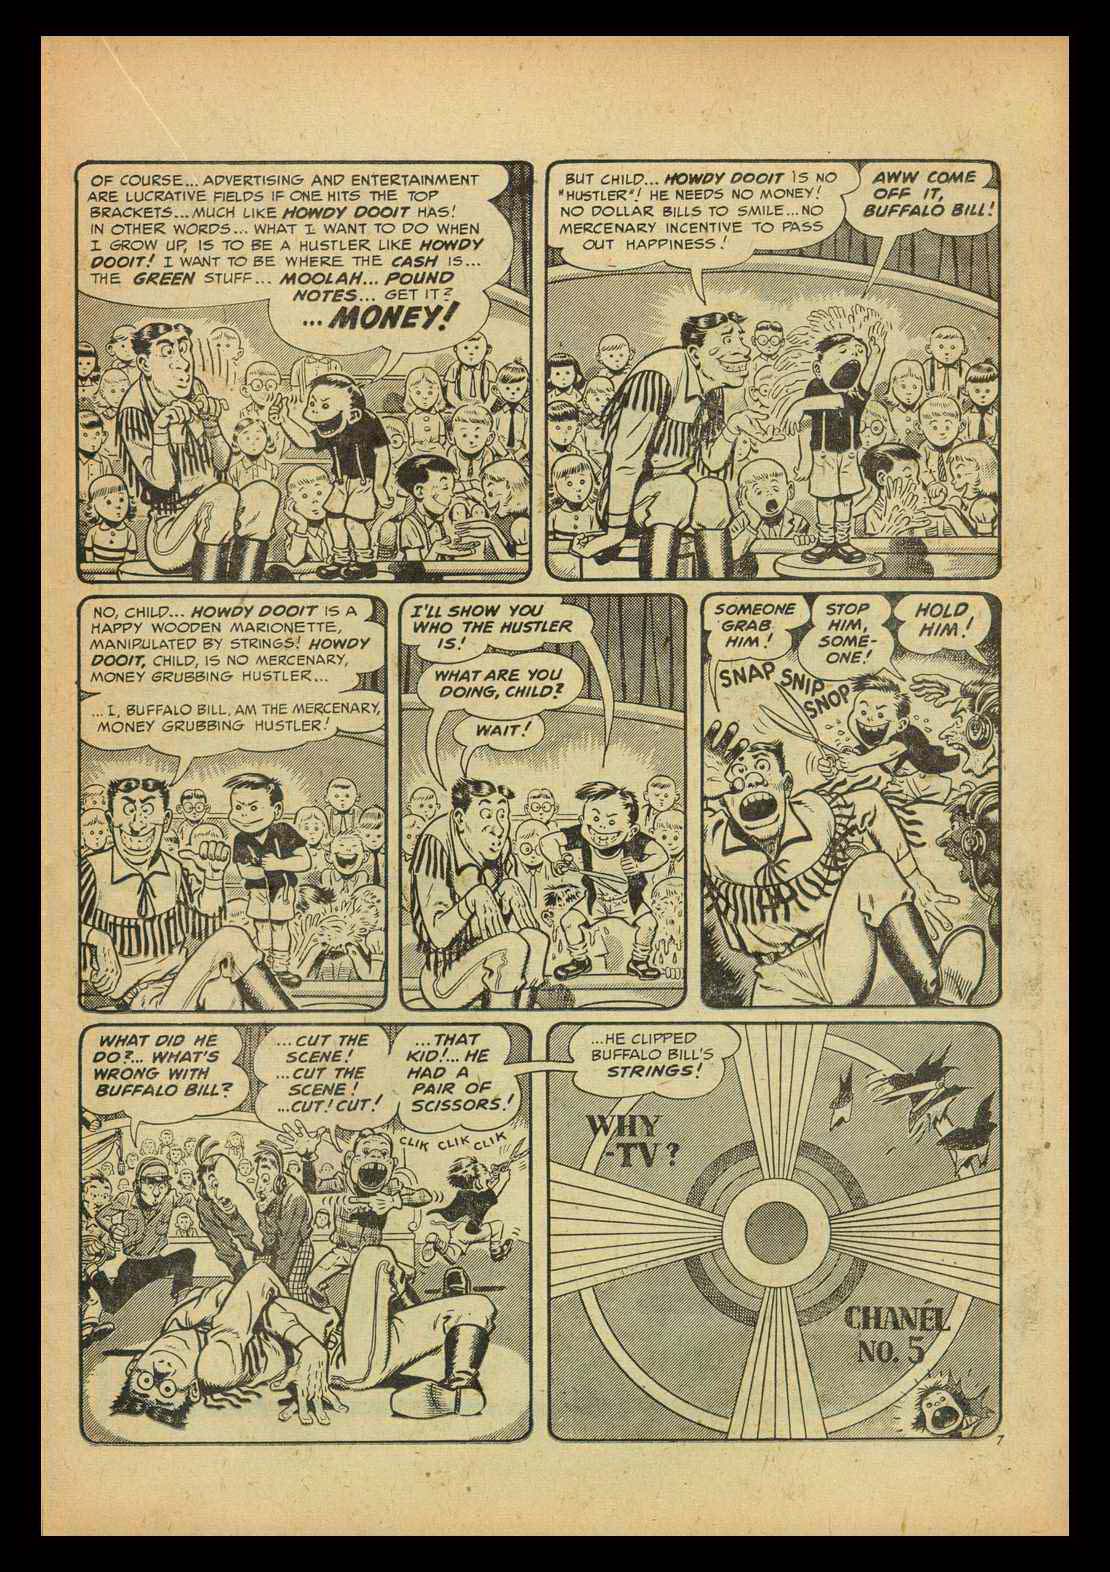 howdy_dooit_Page_7_Im#0007